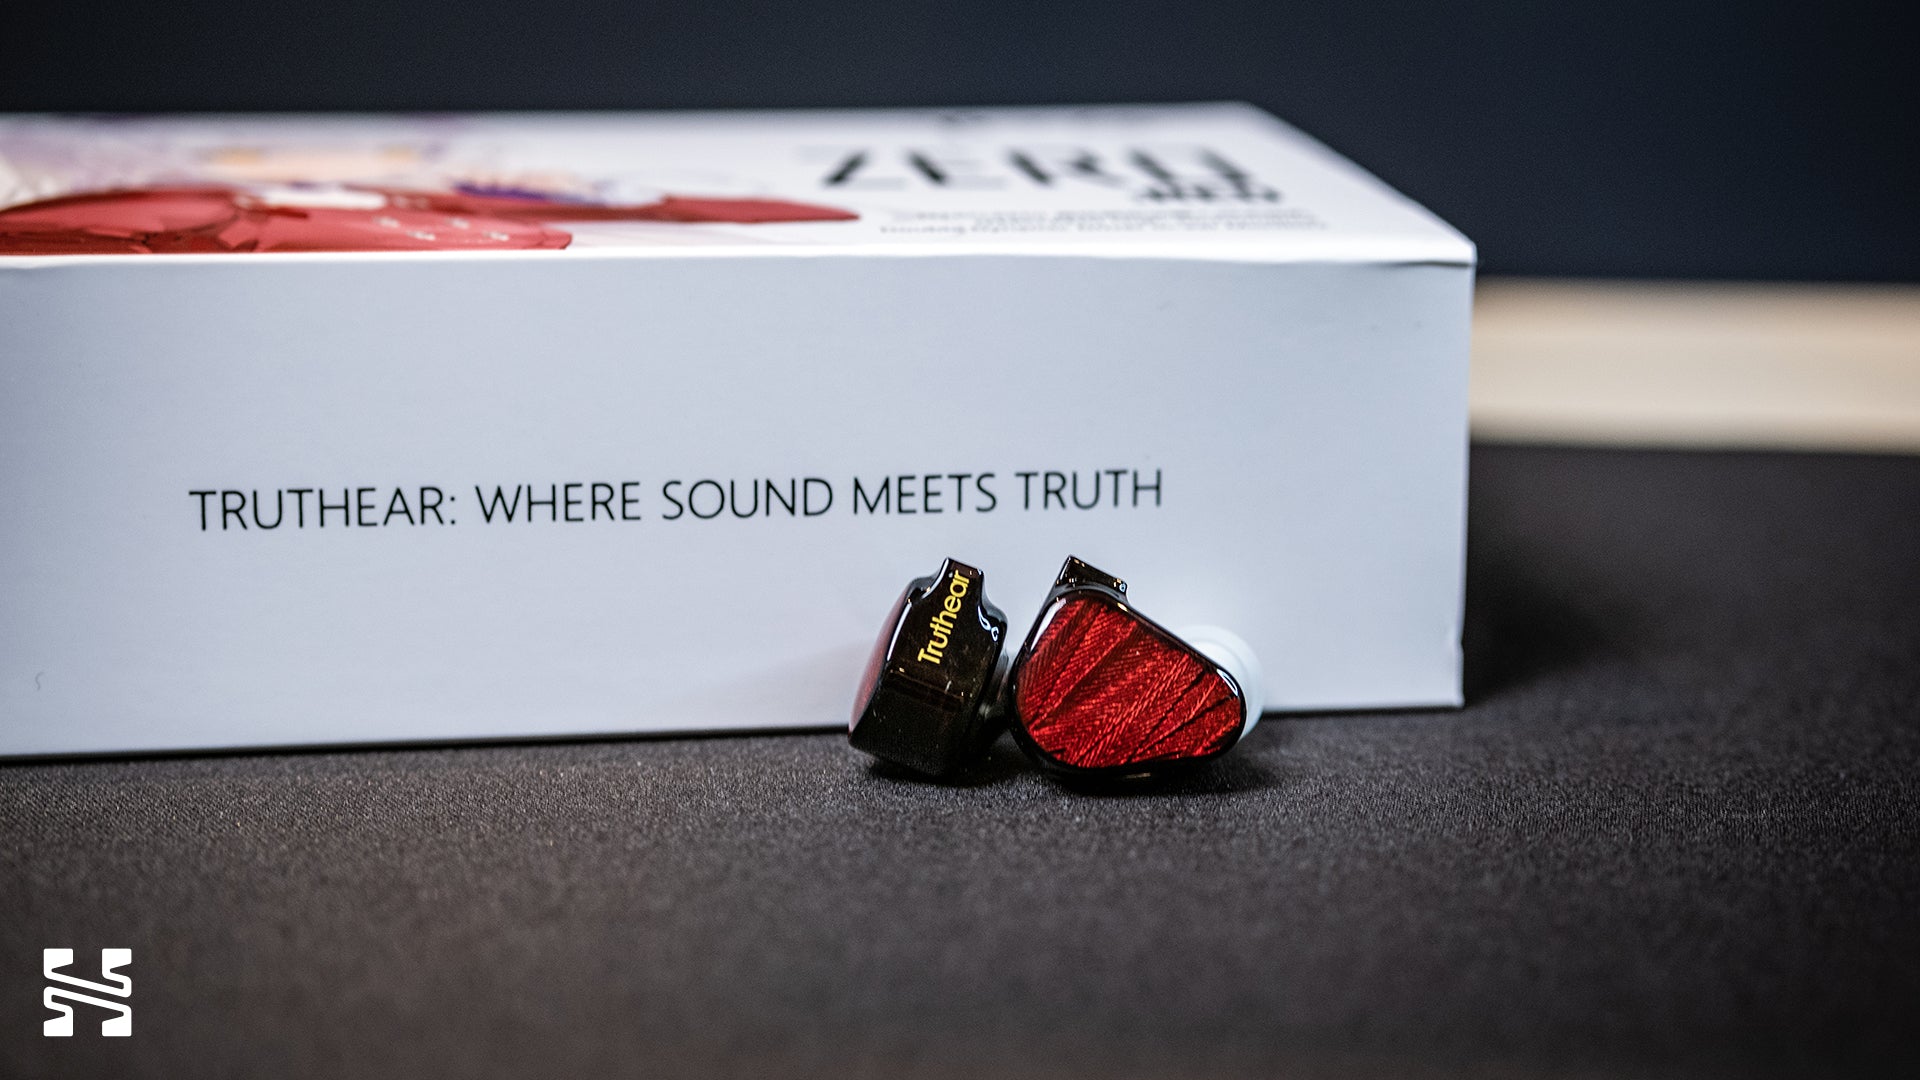 Truthear x Crinacle ZERO In-Ear Monitors Review - Two Dynamic